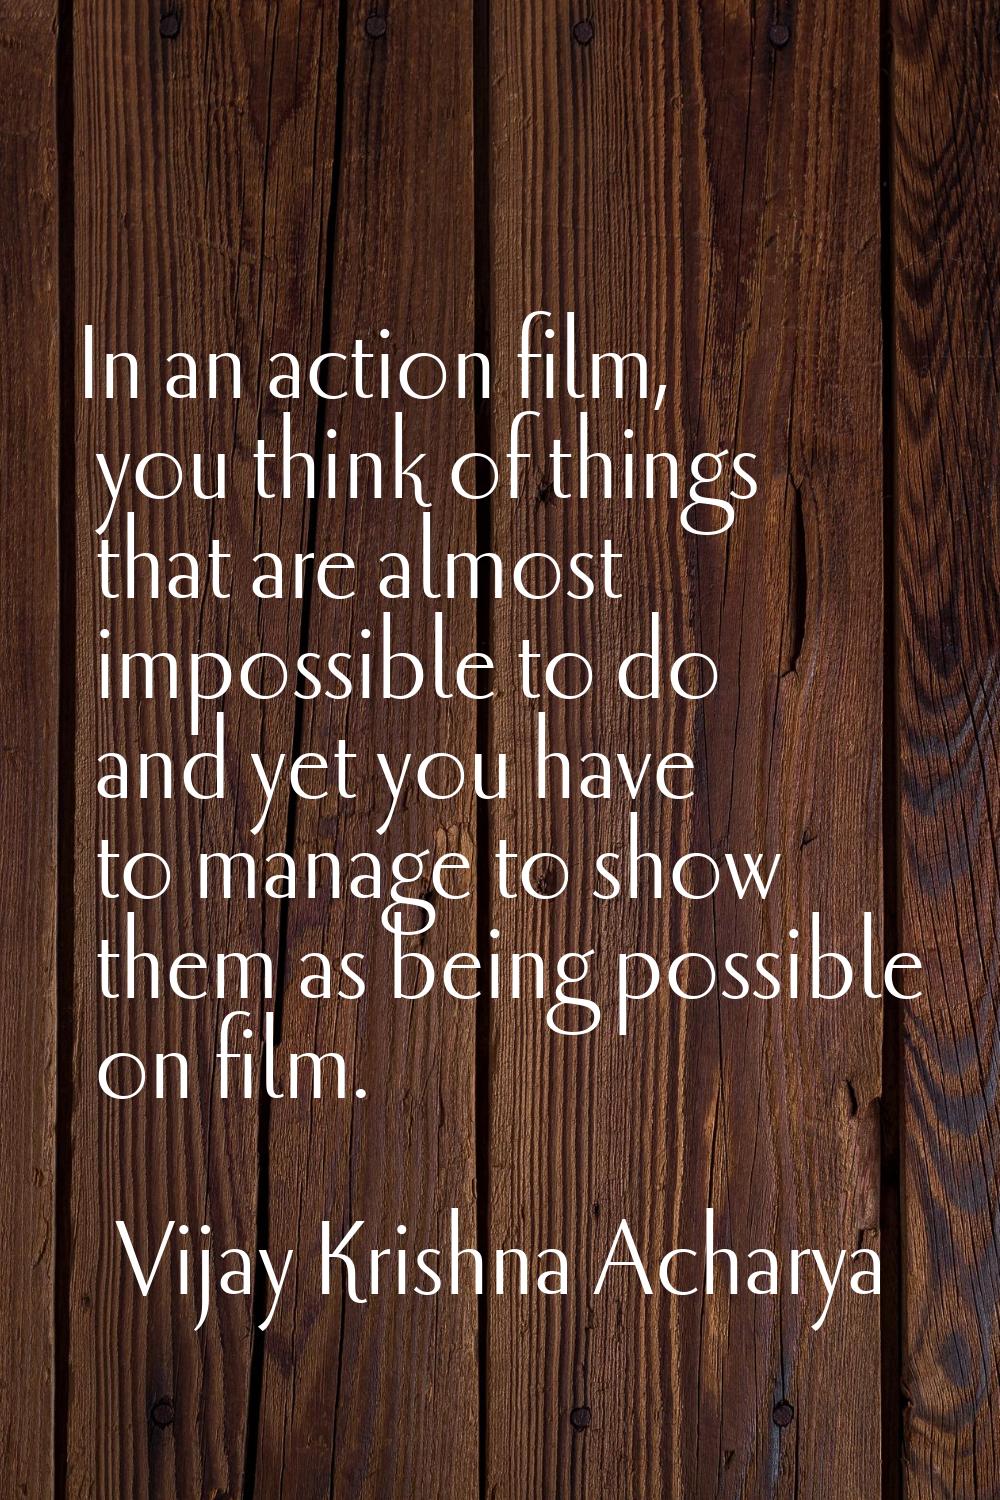 In an action film, you think of things that are almost impossible to do and yet you have to manage 